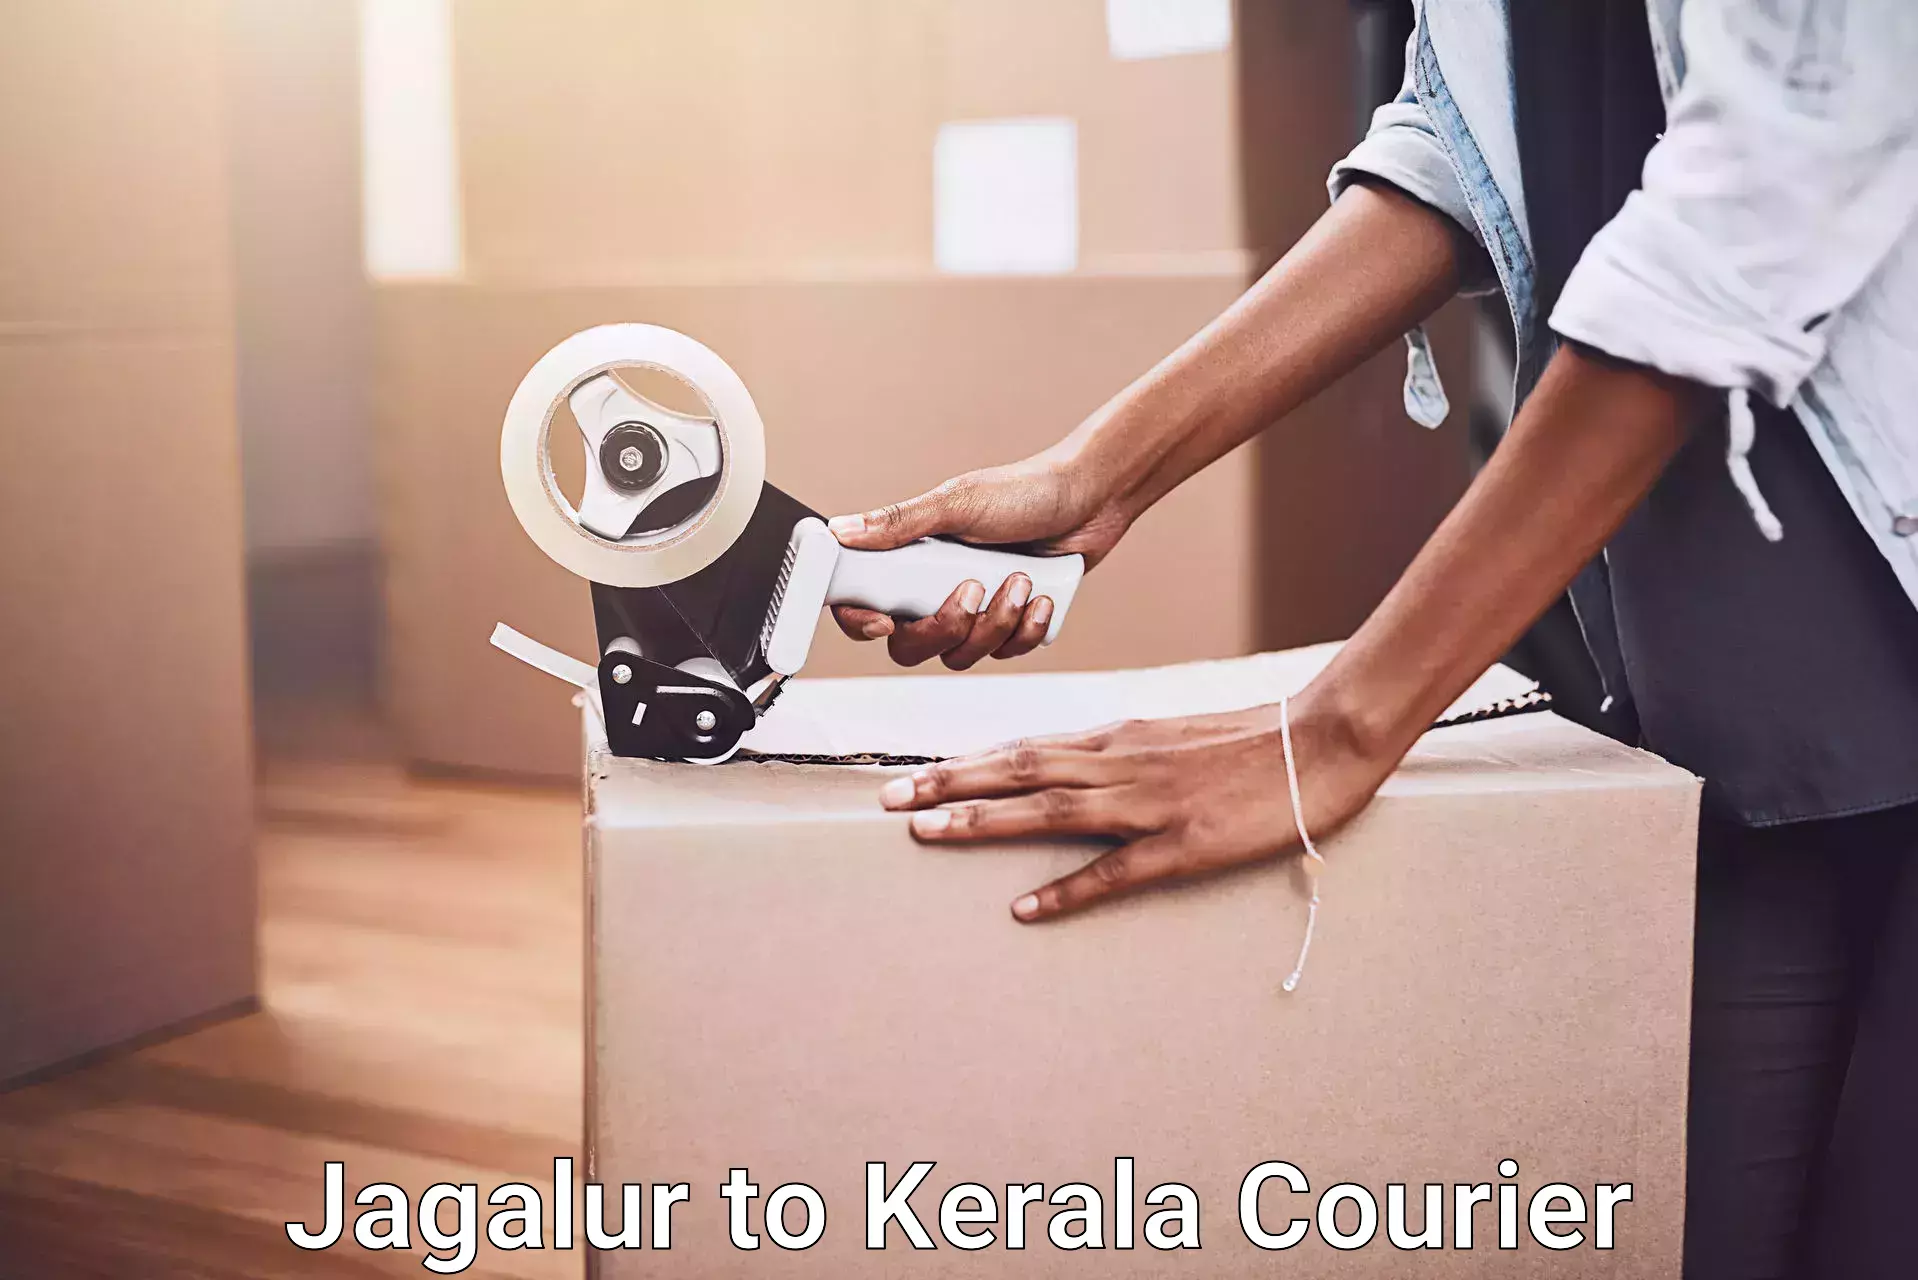 Residential moving experts Jagalur to Cochin Port Kochi